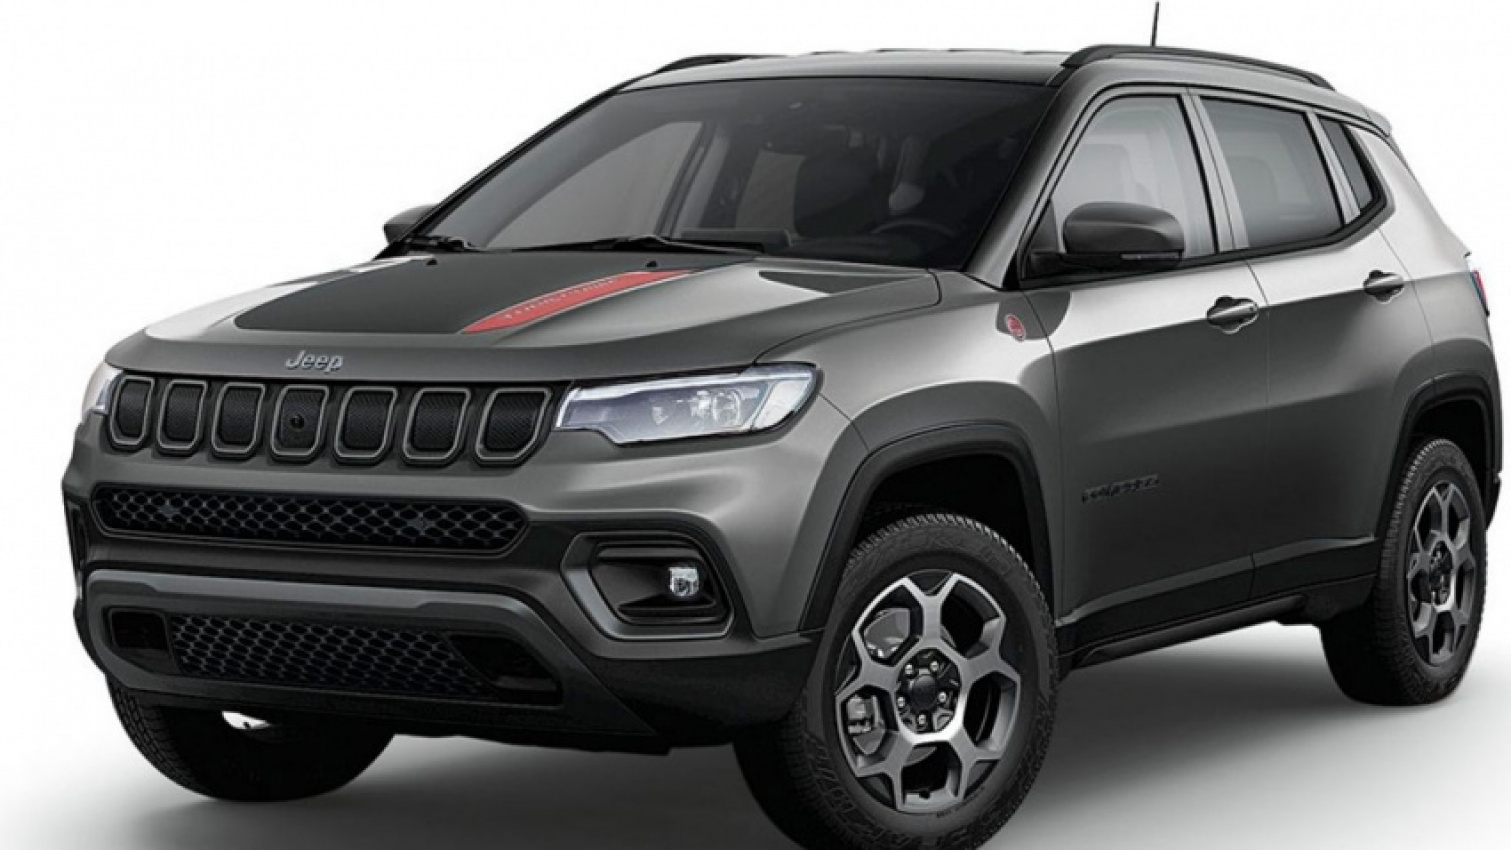 autos, cars, jeep, 2022 jeep compass trailhawk, 2022 jeep compass trailhawk india, 2022 jeep compass trailhawk india price, 2022 jeep compass trailhawk price, auto news, carandbike, jeep compass, jeep compass trailhawk, jeep compass trailhawk india, jeep compass trailhawk india price, jeep compass trailhawk india price in india, jeep india, news, 2022 jeep compass trailhawk launched in india at ₹ 30.70 lakh